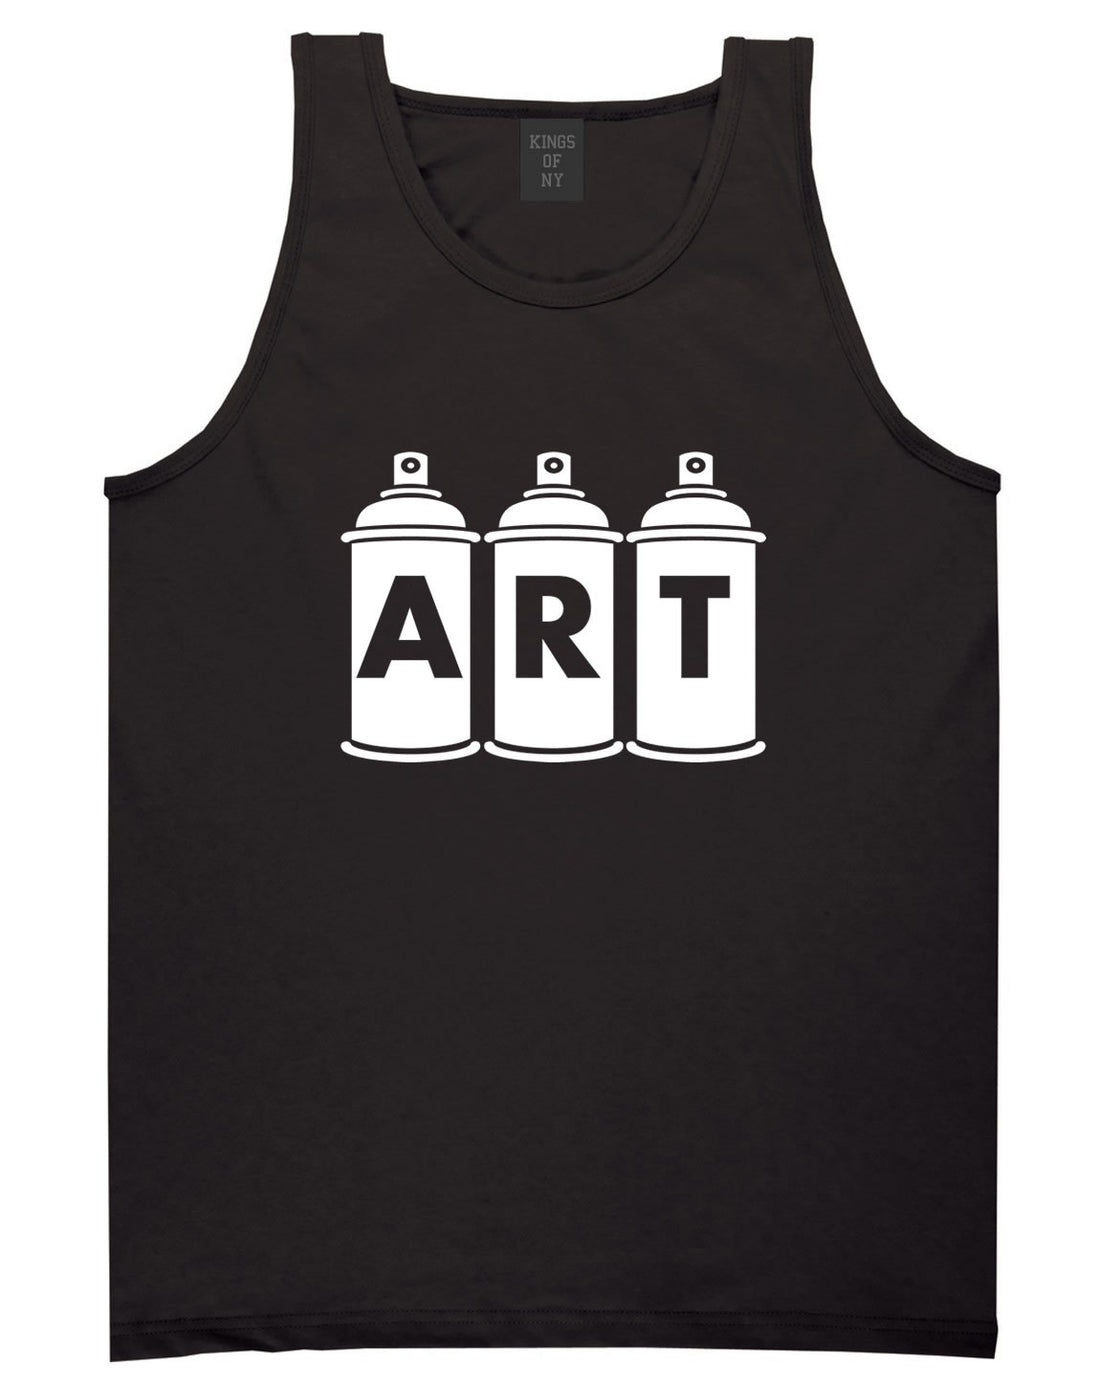 Art graf graffiti spray can paint artist Tank Top in Black By Kings Of NY